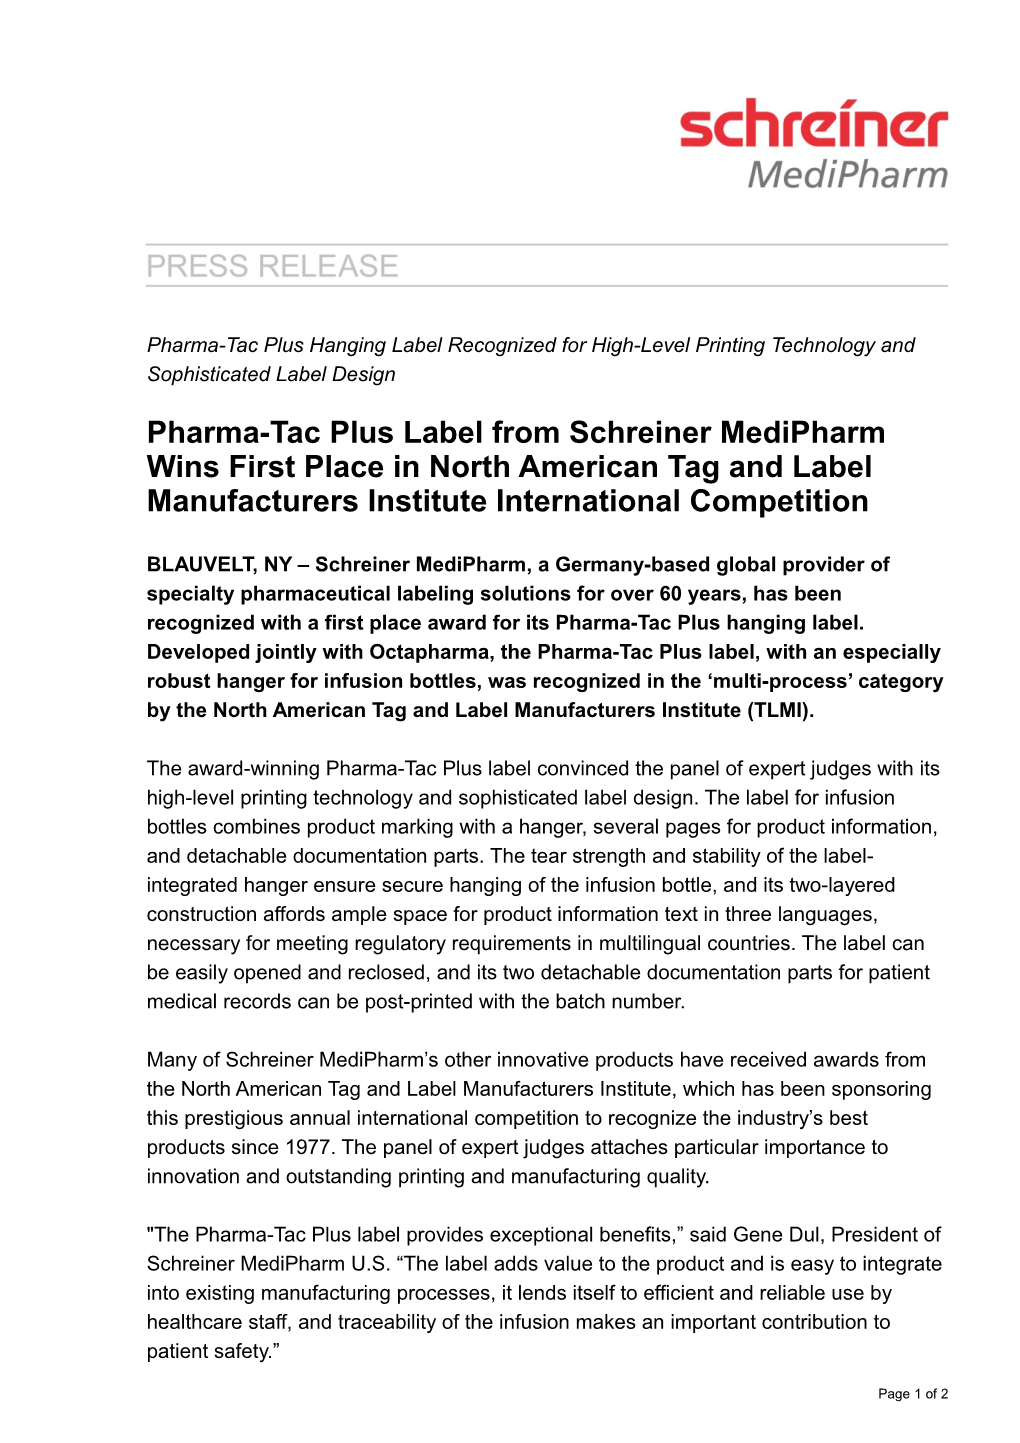 Pharma-Tac Plus Label from Schreiner Medipharm Wins First Place in North American Tag